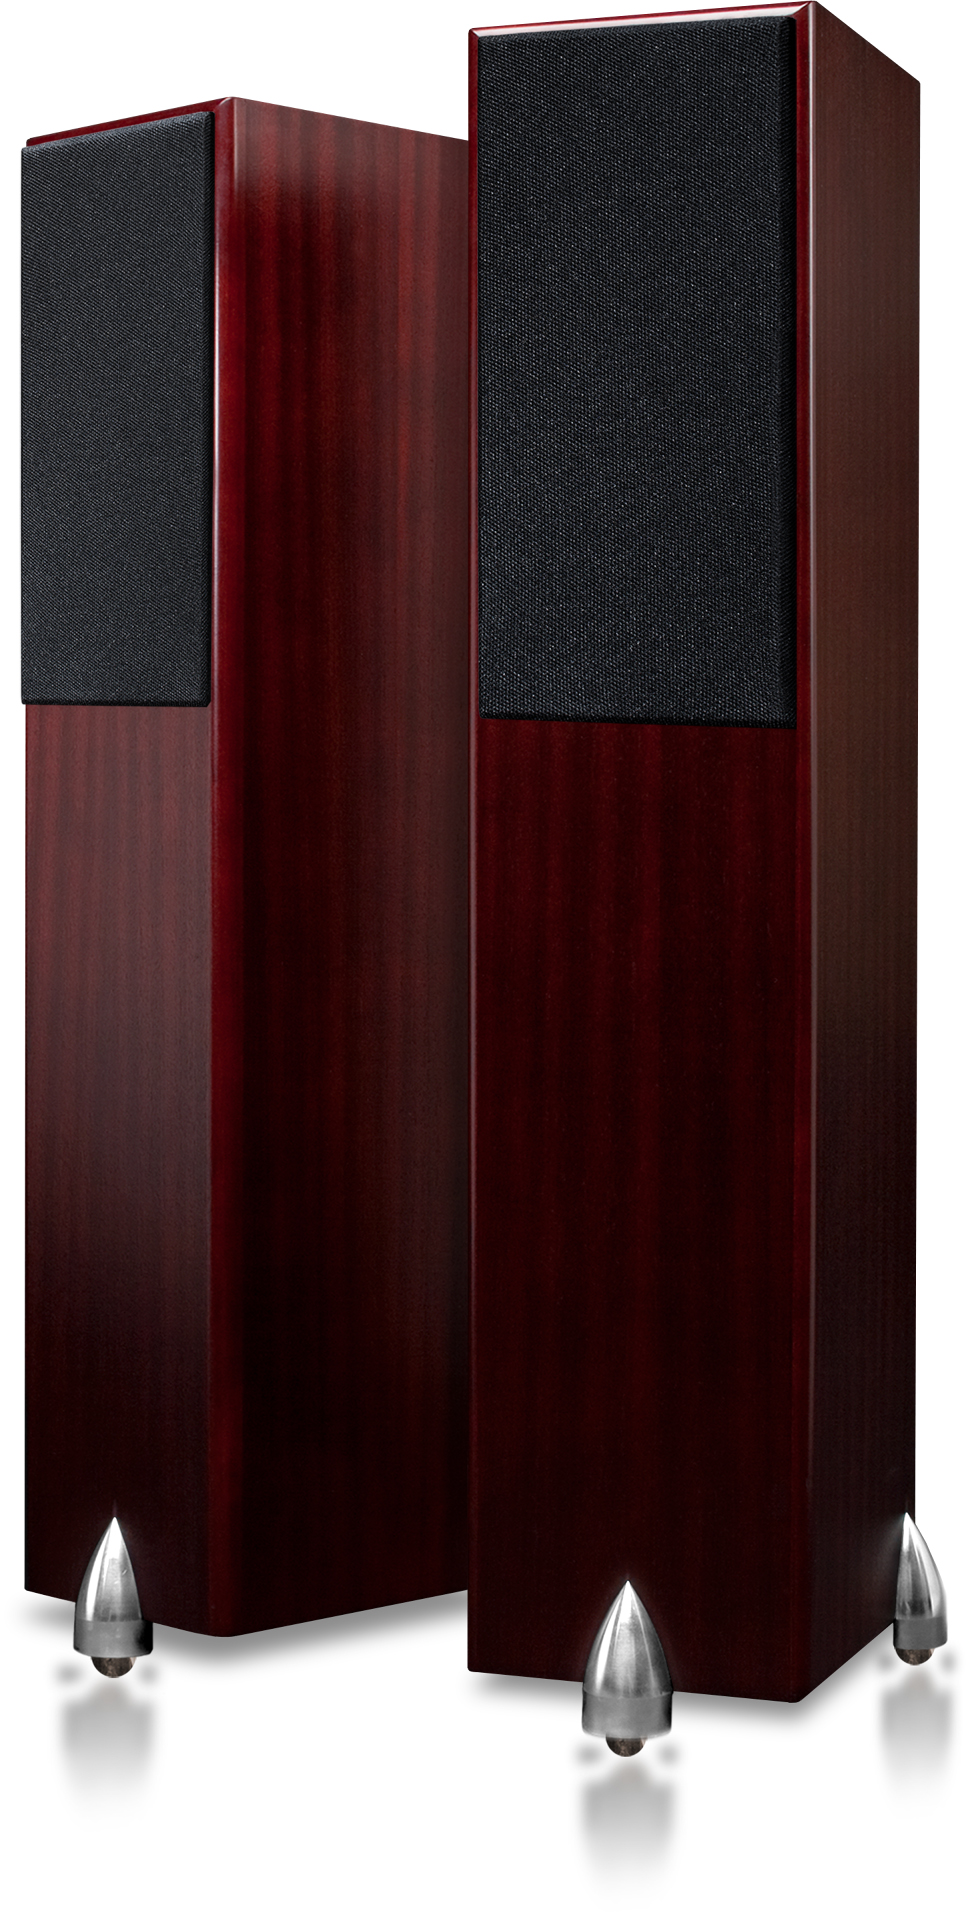 Totem Acoustic Forest mahogany